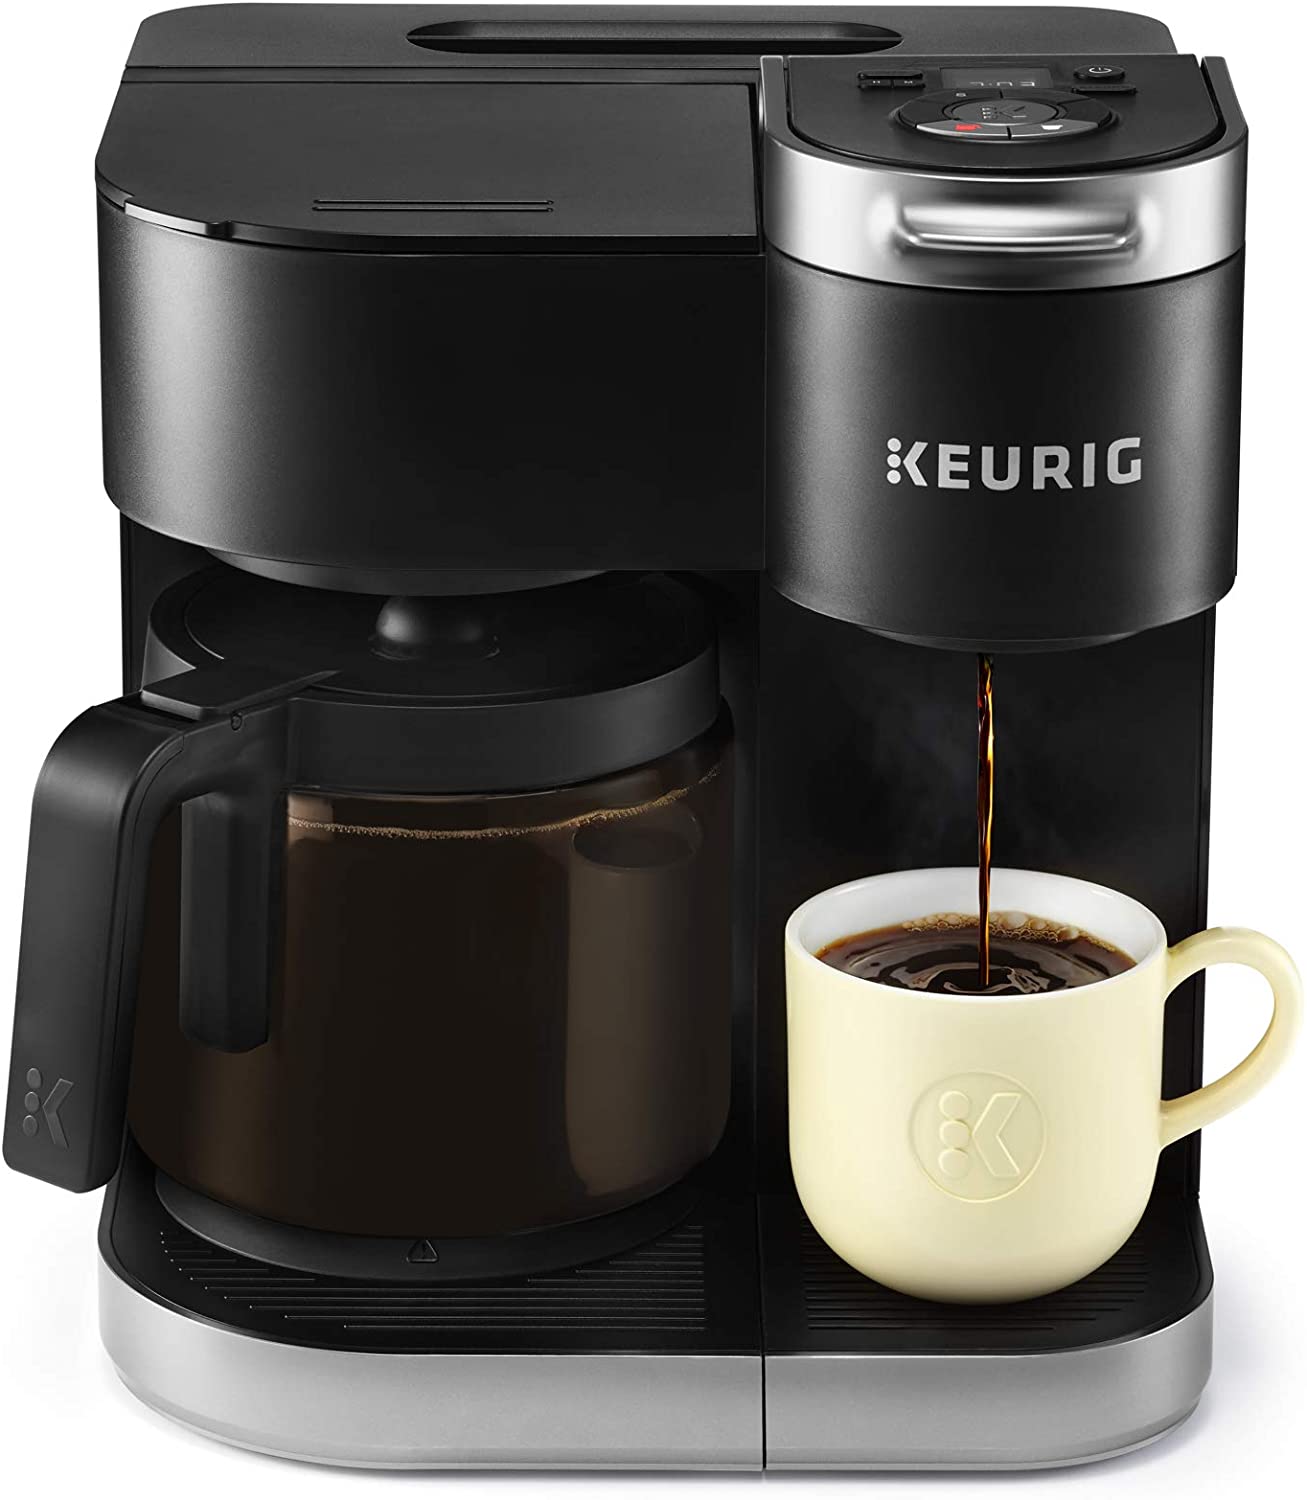 A step by step guide to having an effective use of Keurig coffee maker